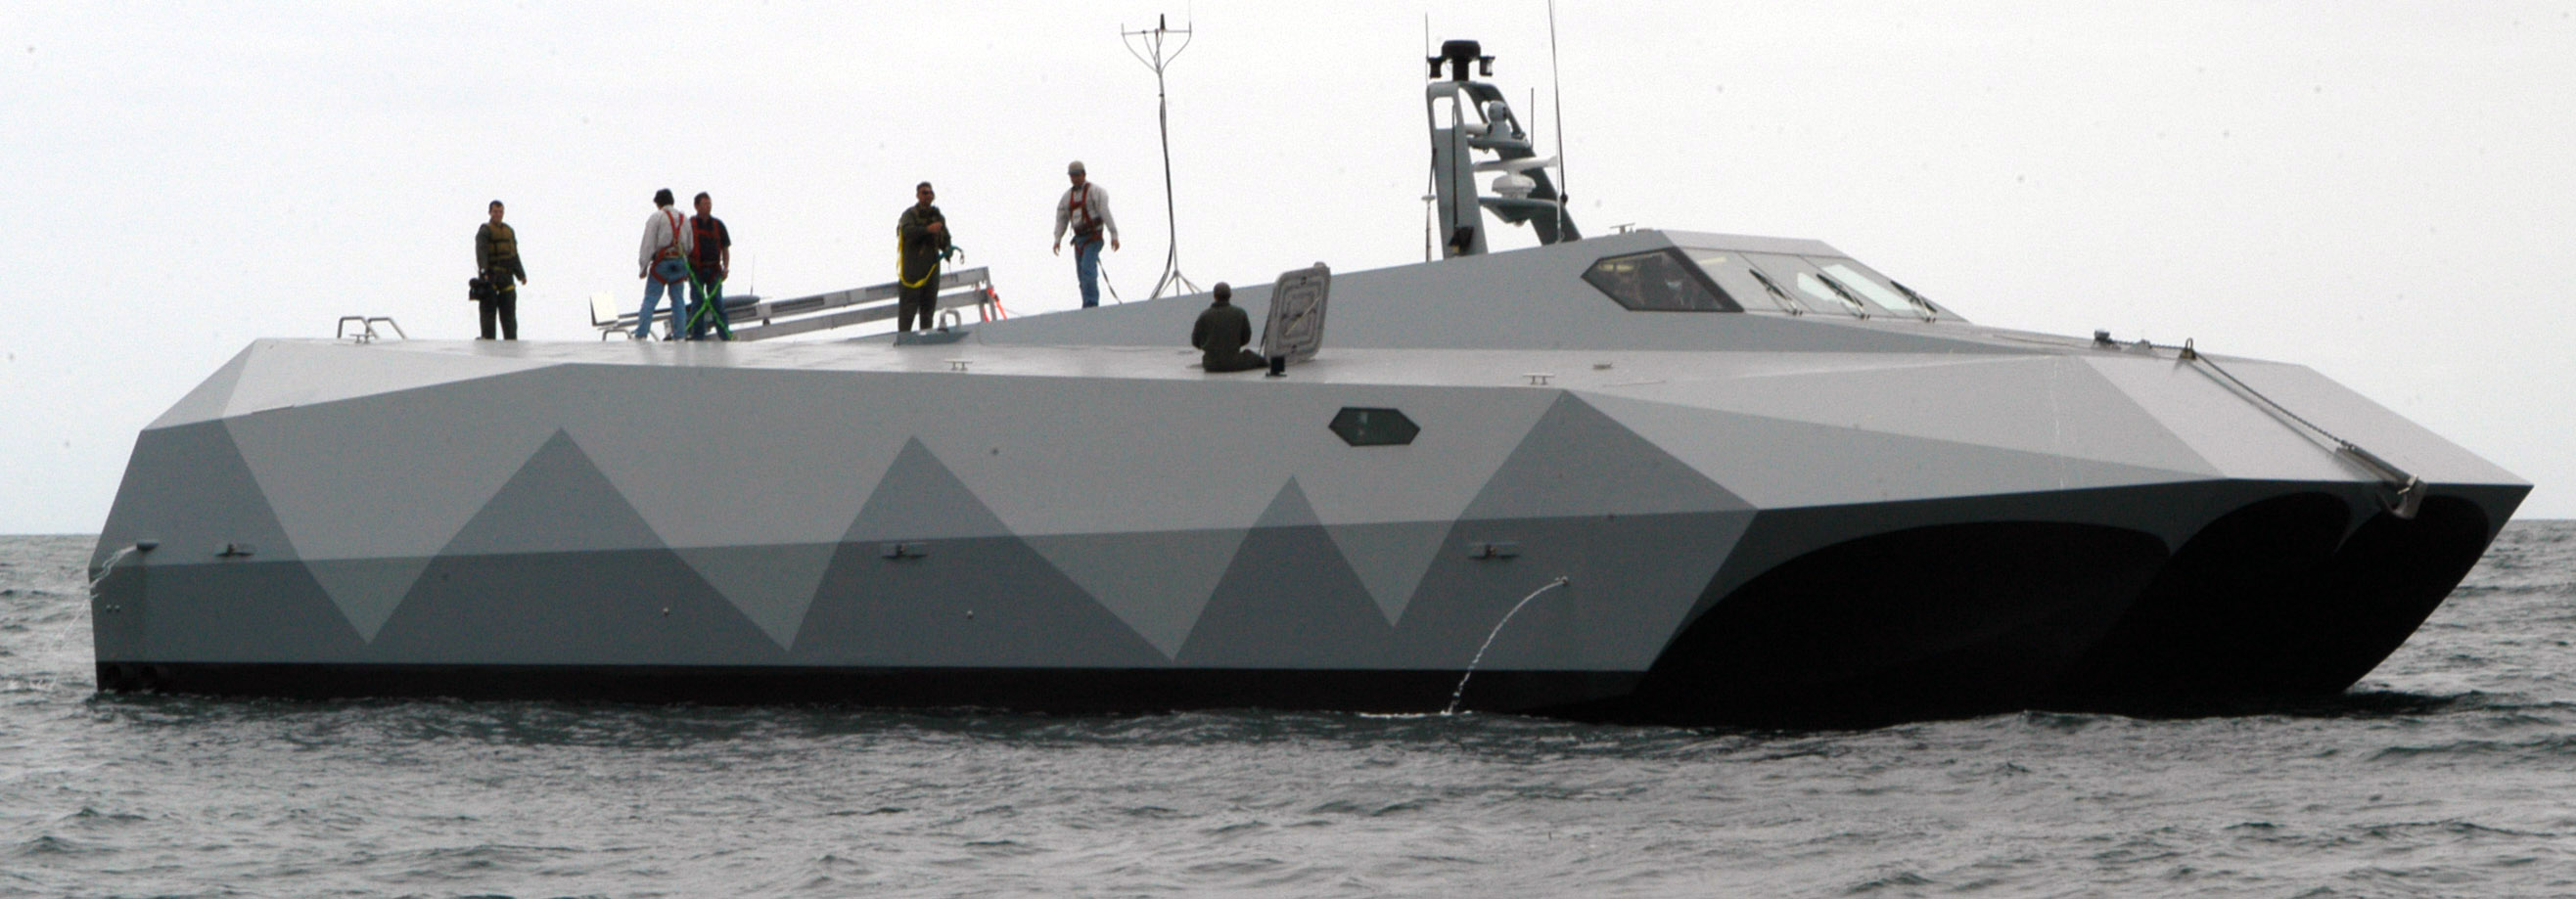 From 2006--The crew of experimental boat ship Stiletto readies the 